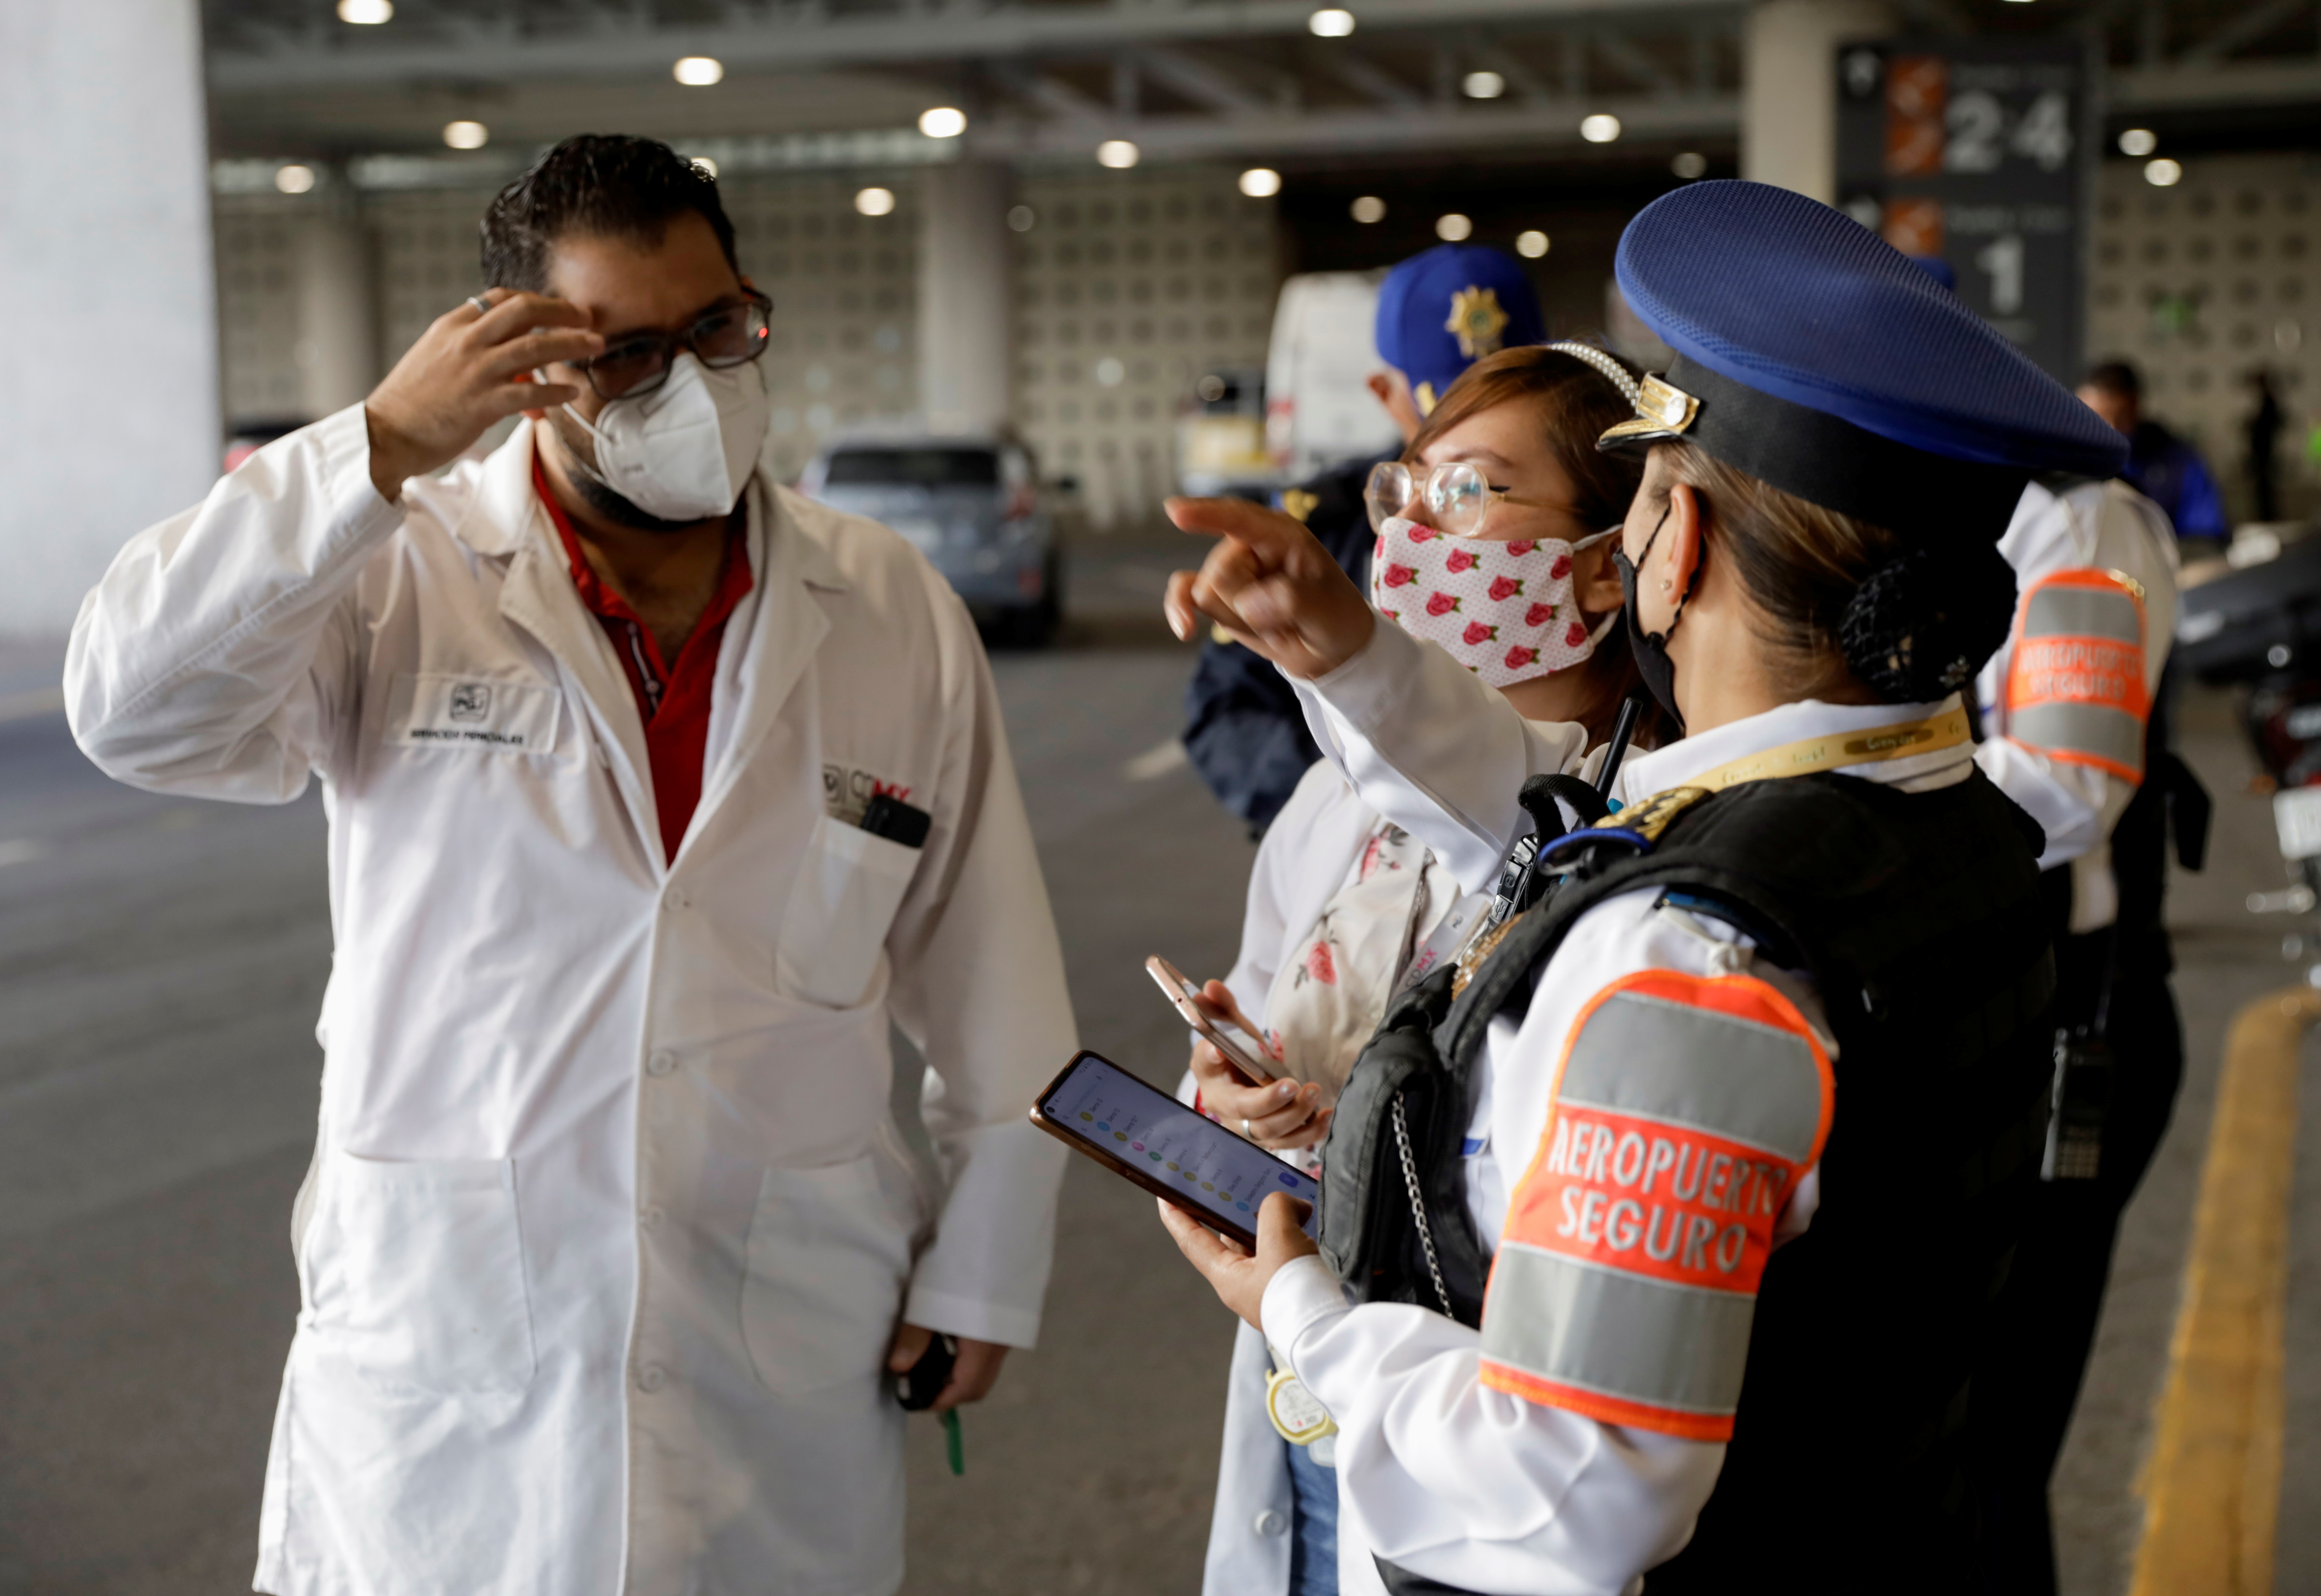 Agents of the city's prosecutors office and police officers collect information outside the airport, in Mexico City